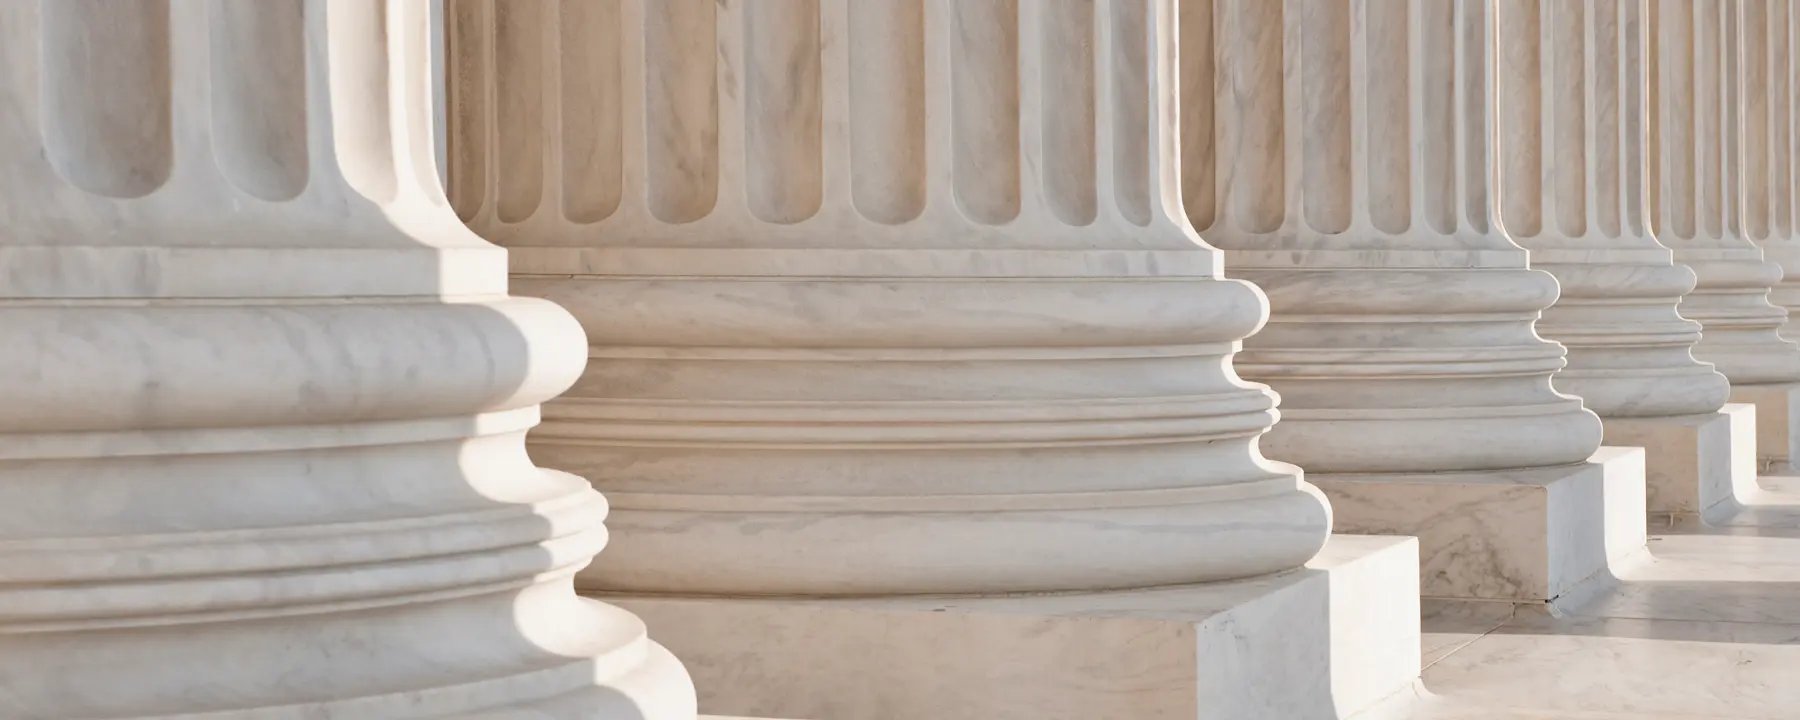 Close up photo of the columns of the US Supreme Court building